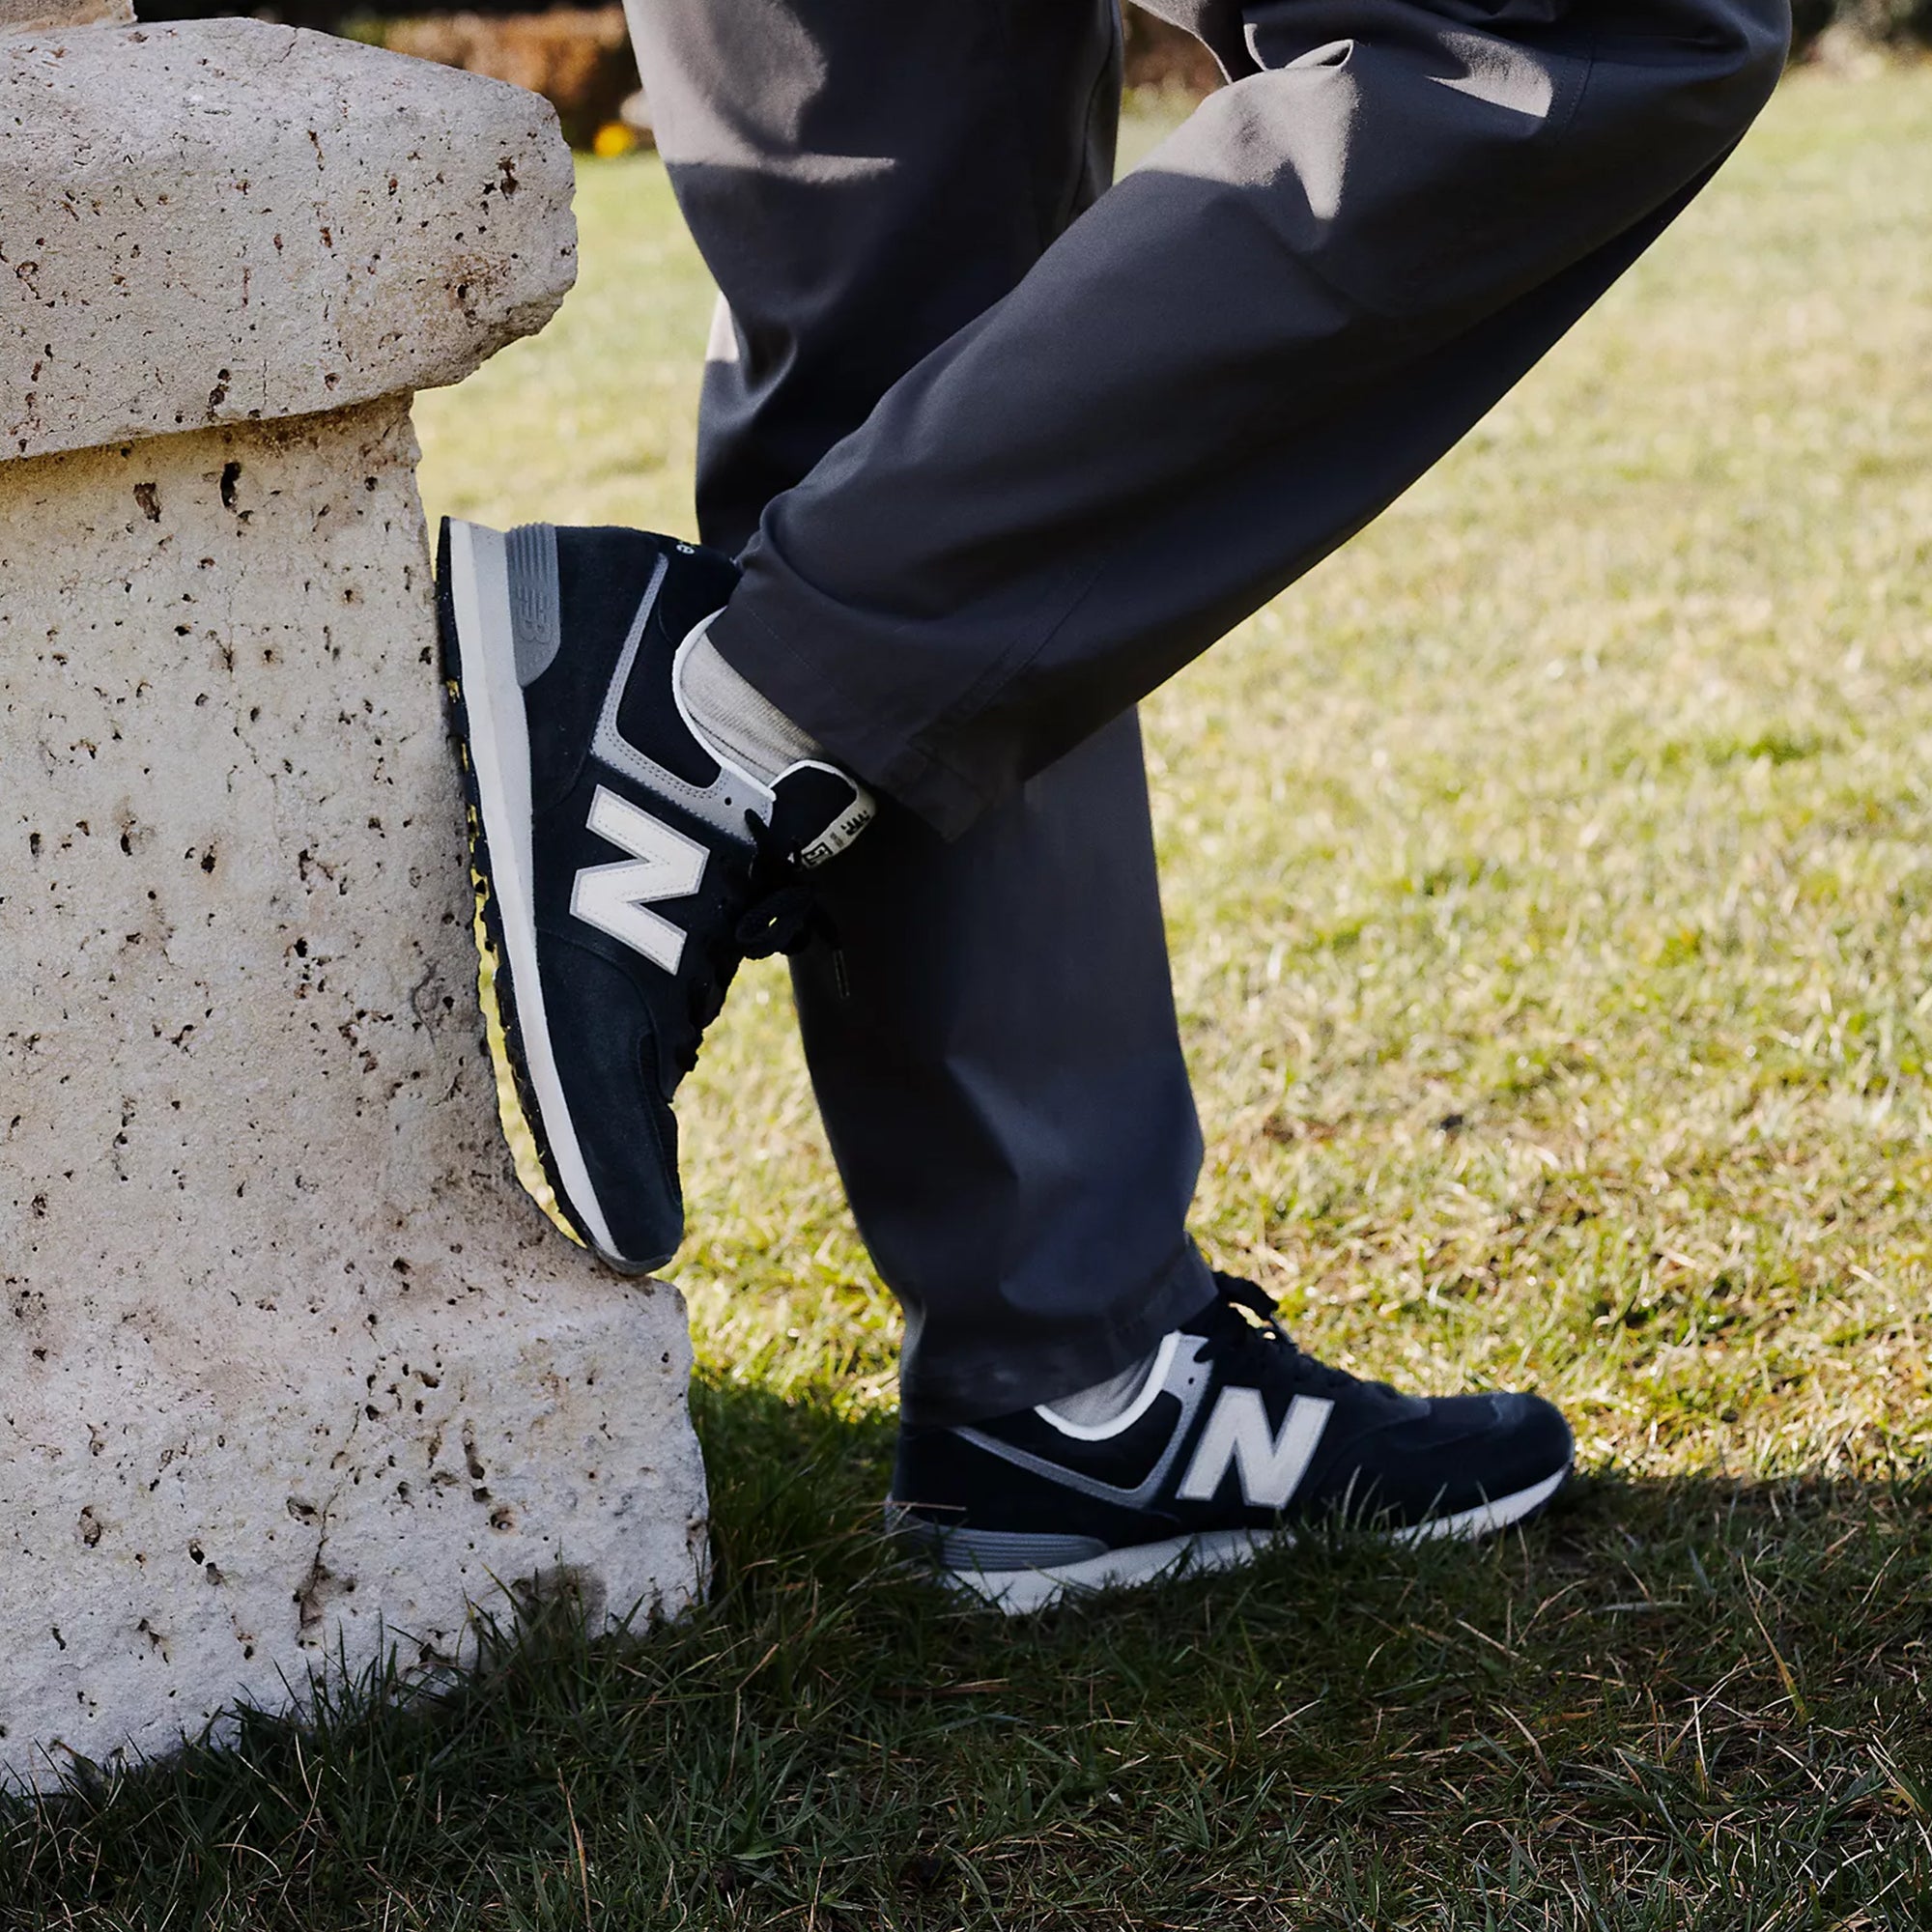 Classics reimagined. The 574 in three new colorways. Check newbalance.com  for local availability.